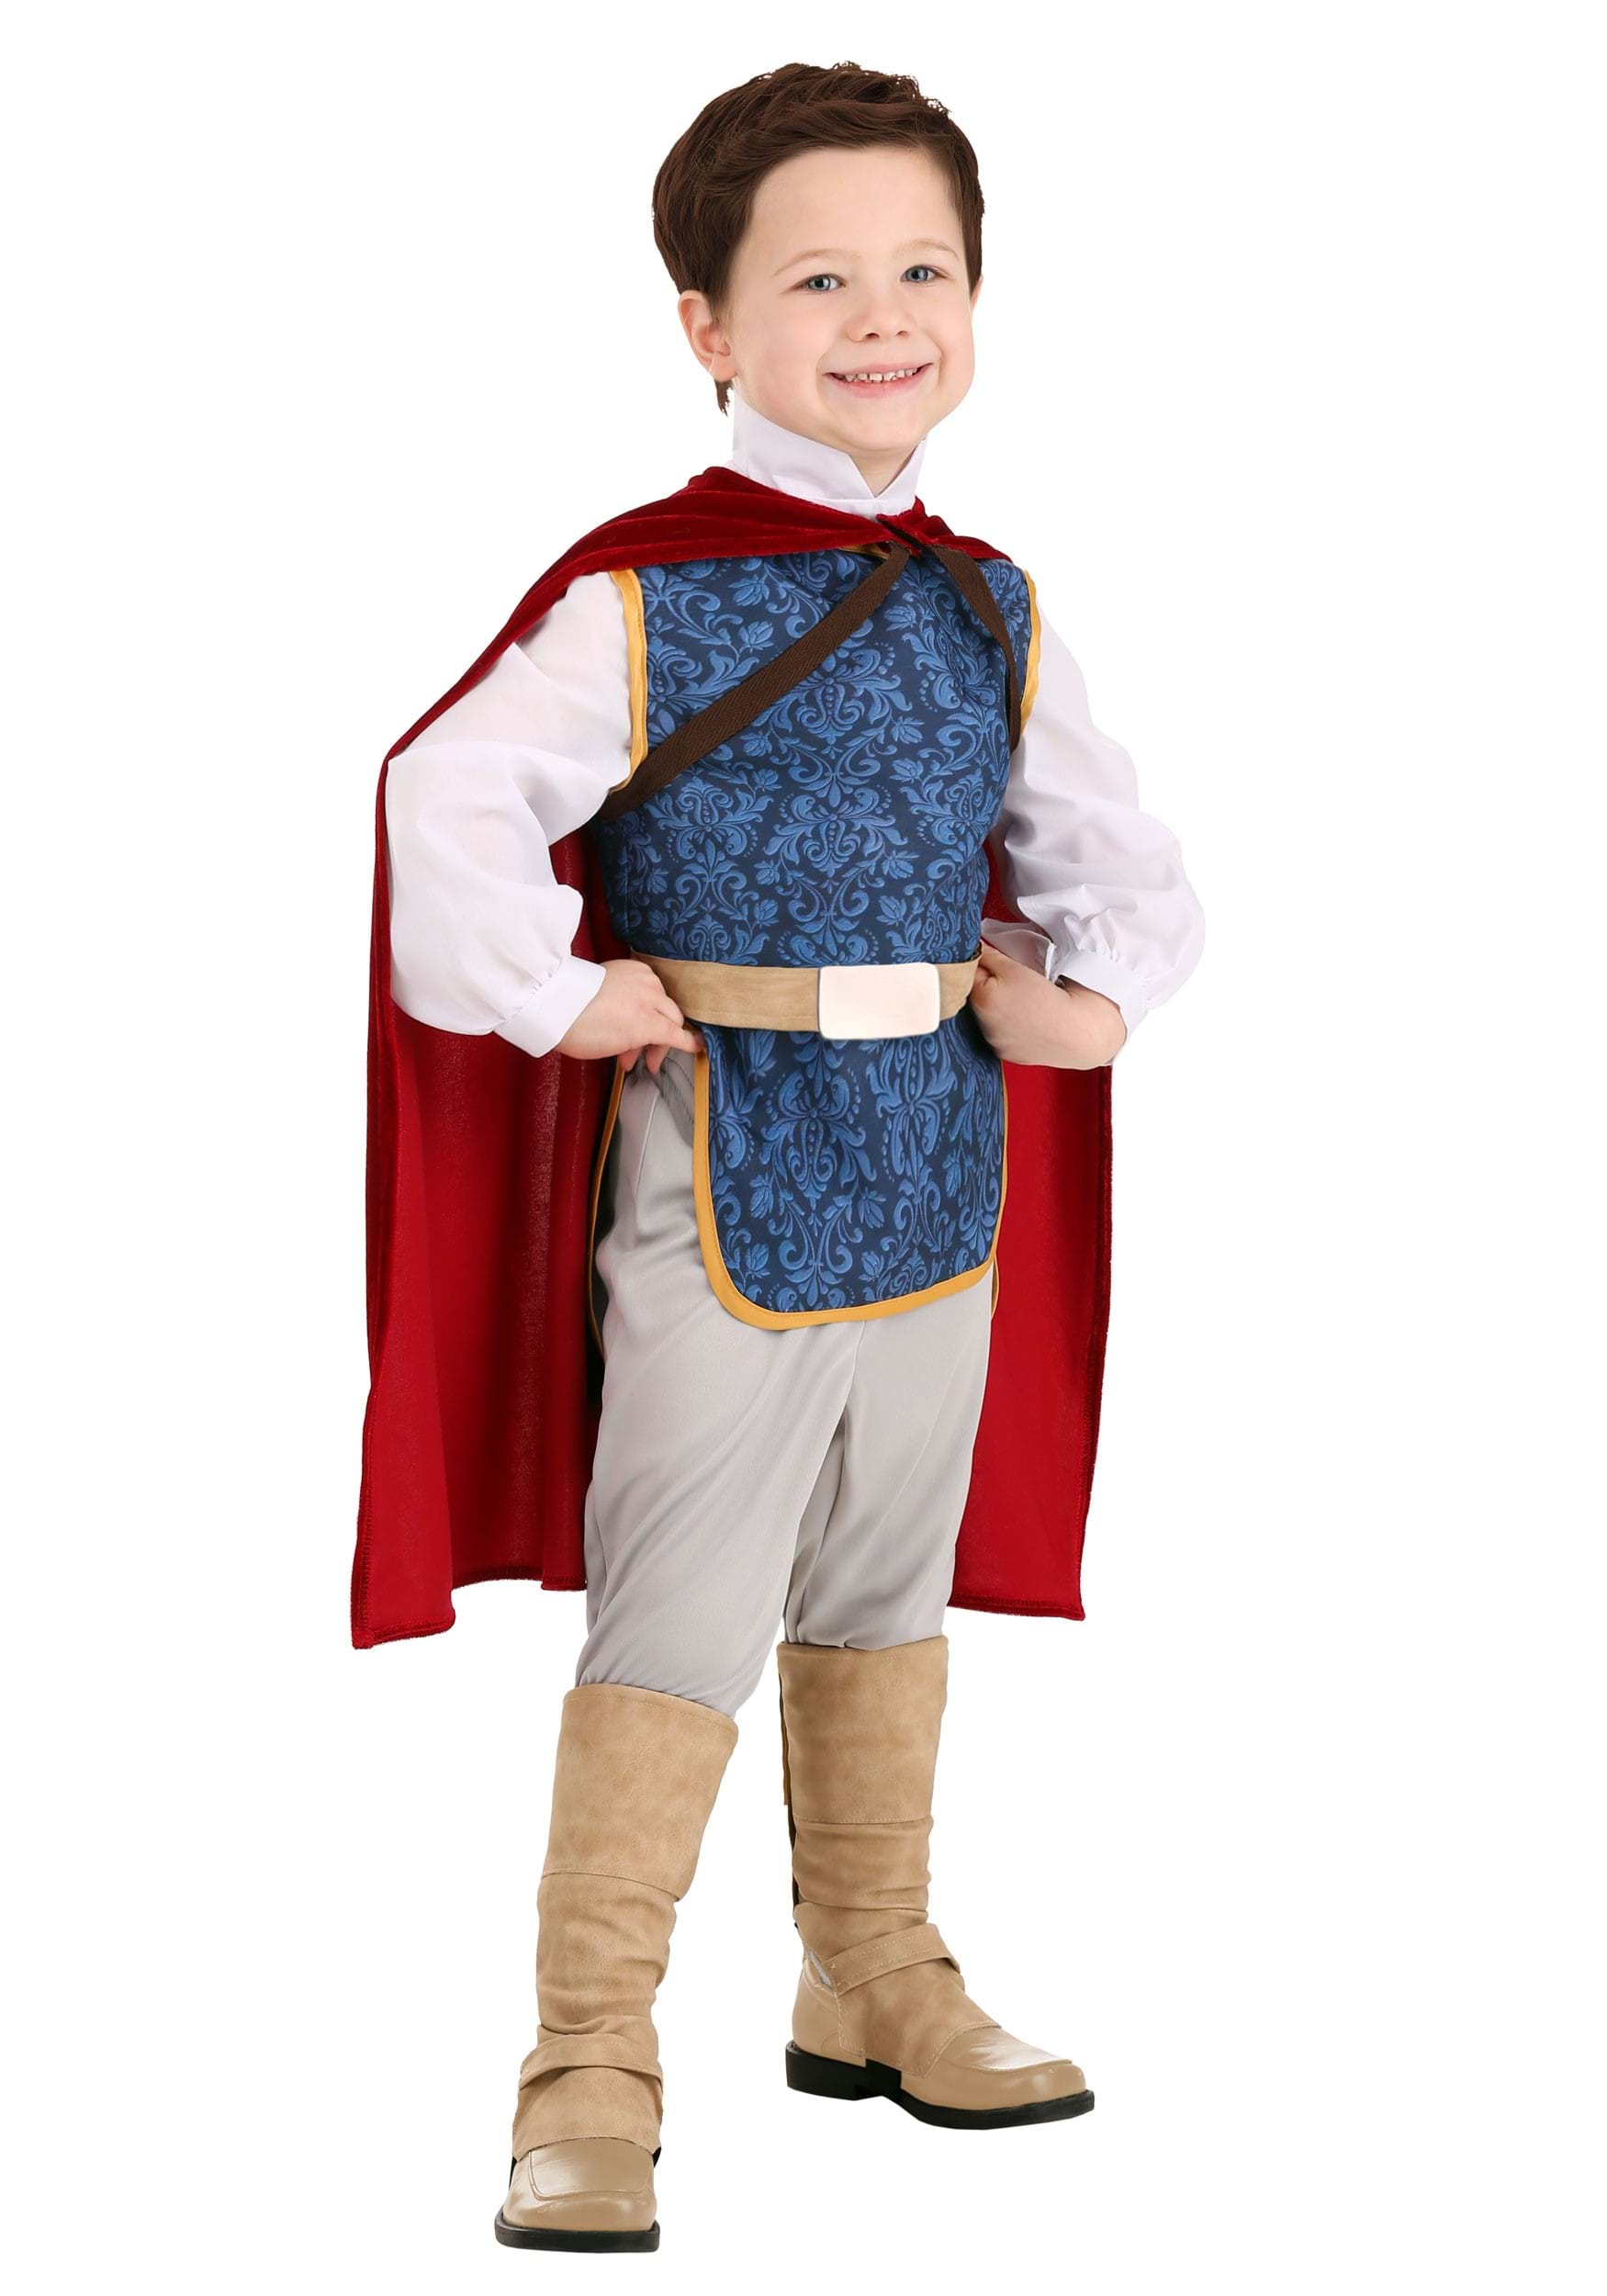 Photos - Fancy Dress Toddler FUN Costumes  Snow White The Prince Costume Brown/Blue/Red 